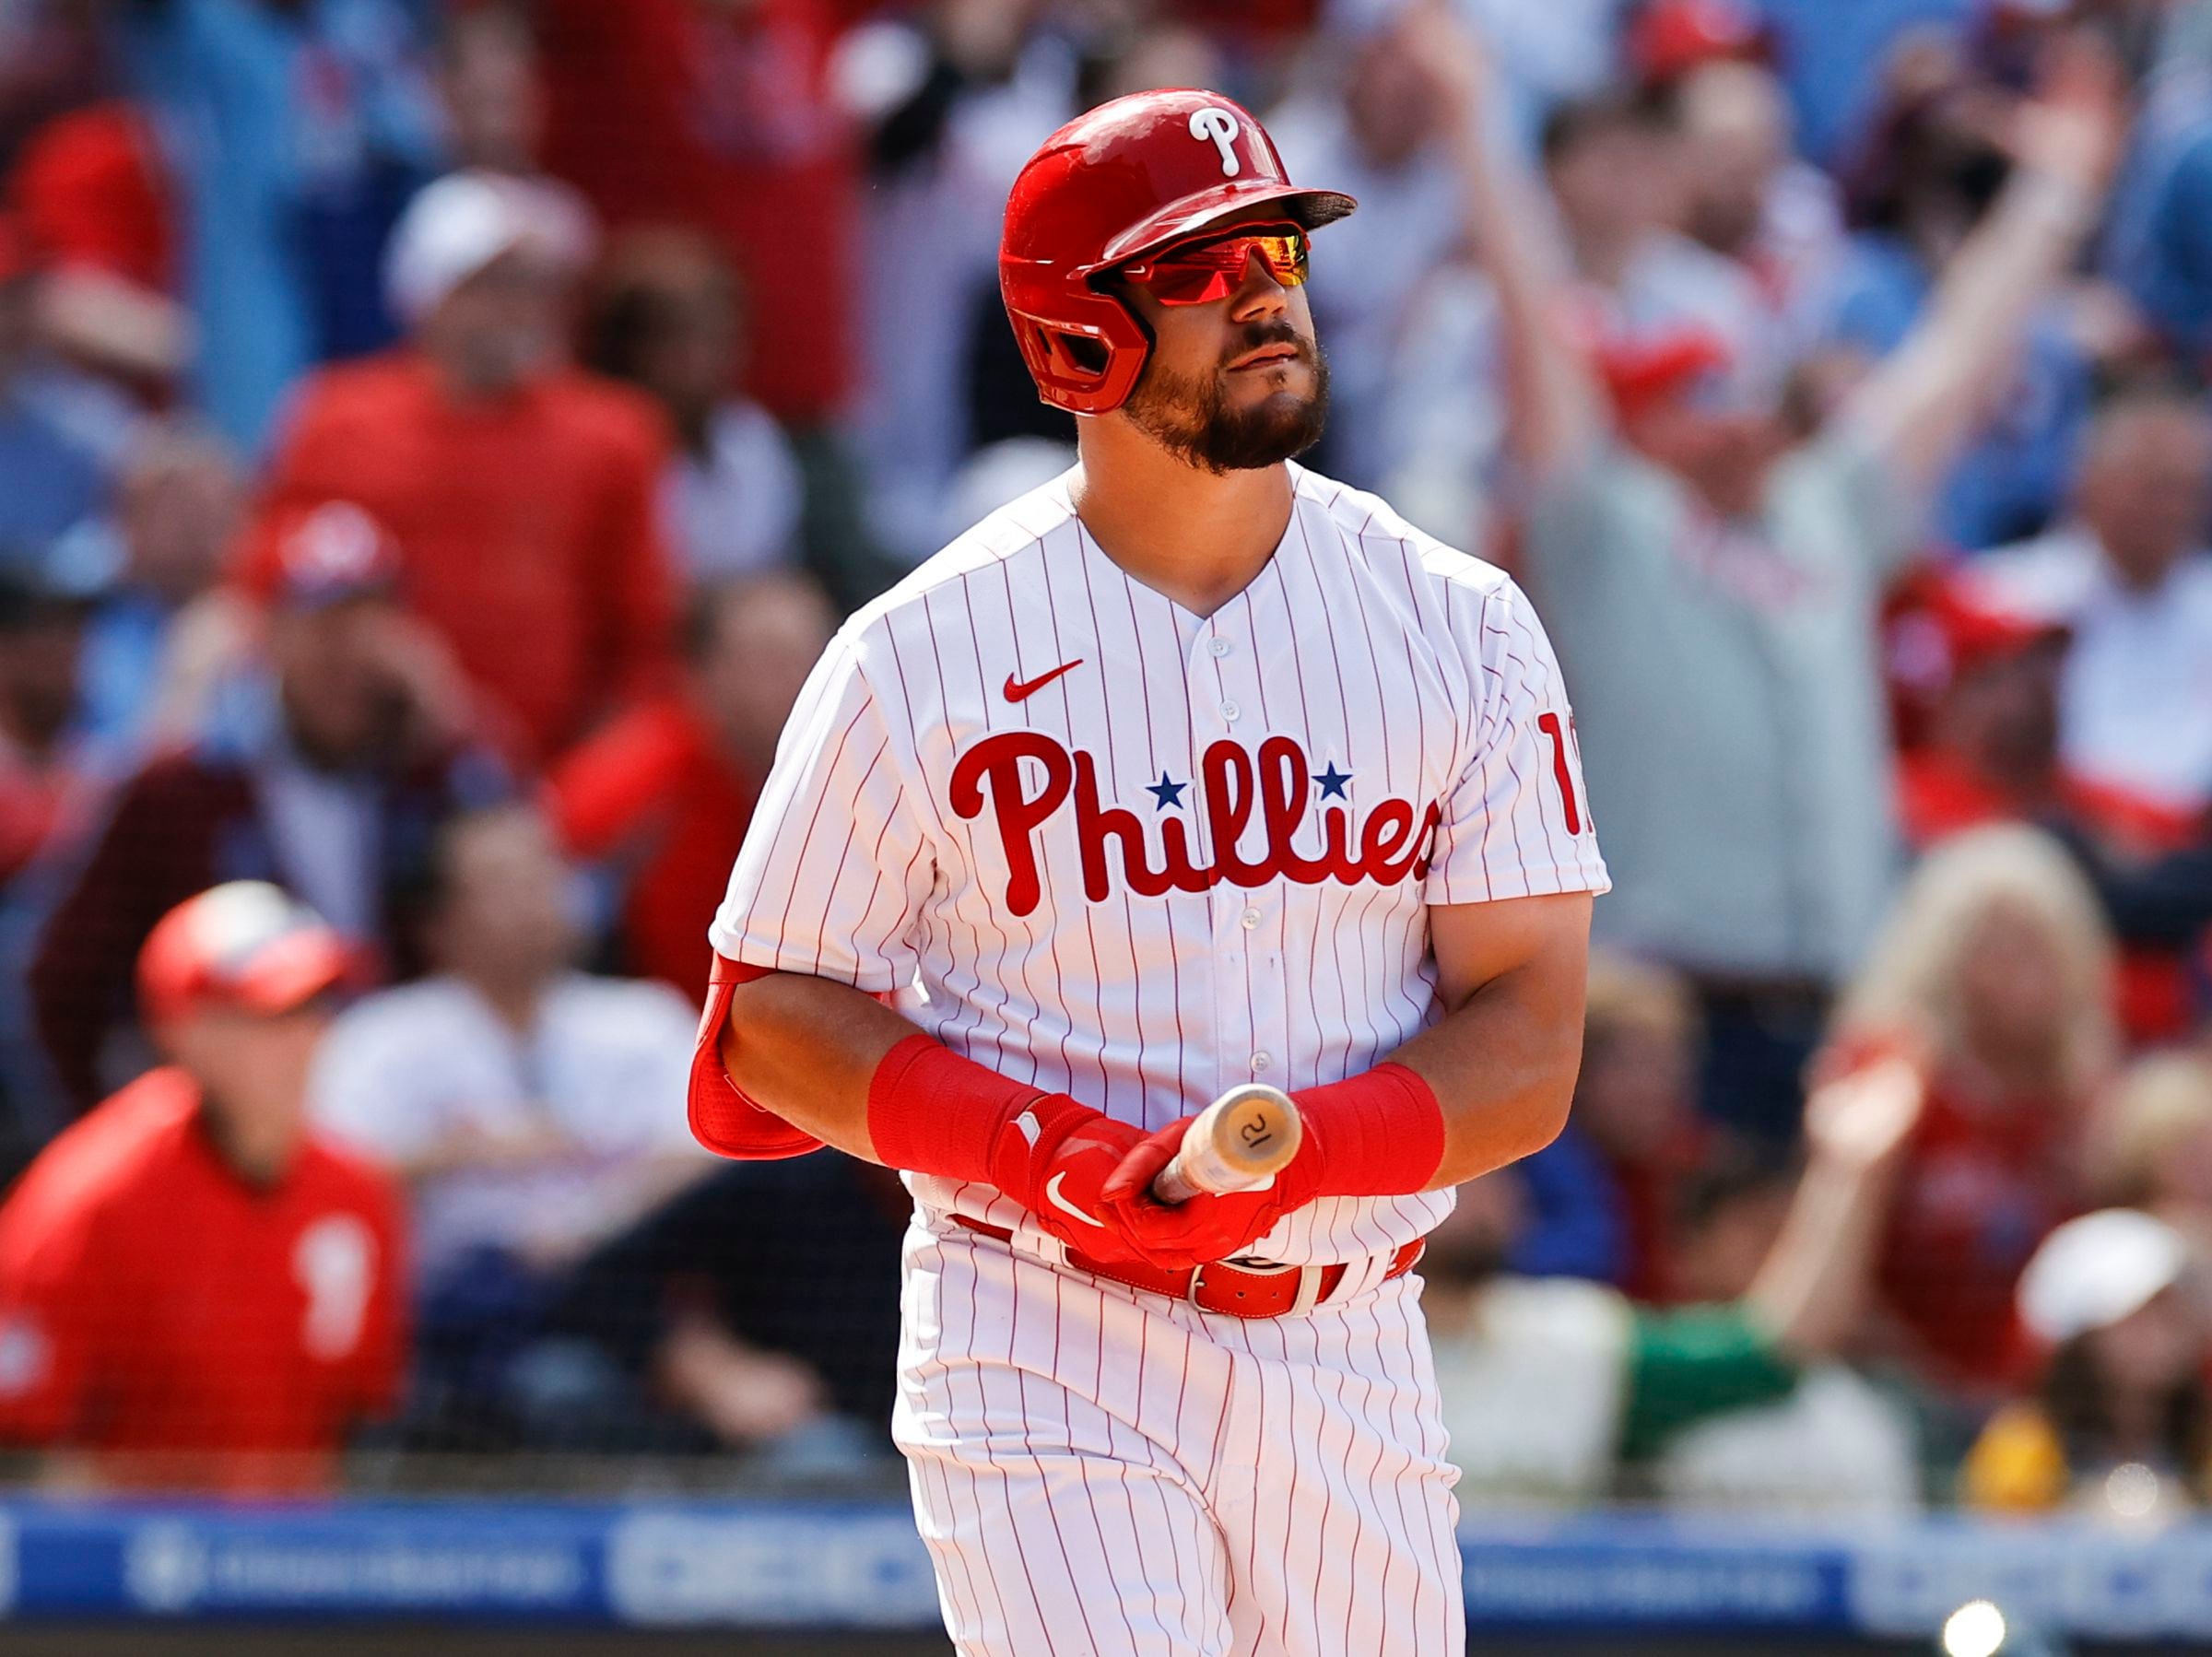 Schwarber, Hall help Phillies rout Braves 14-4 - NBC Sports